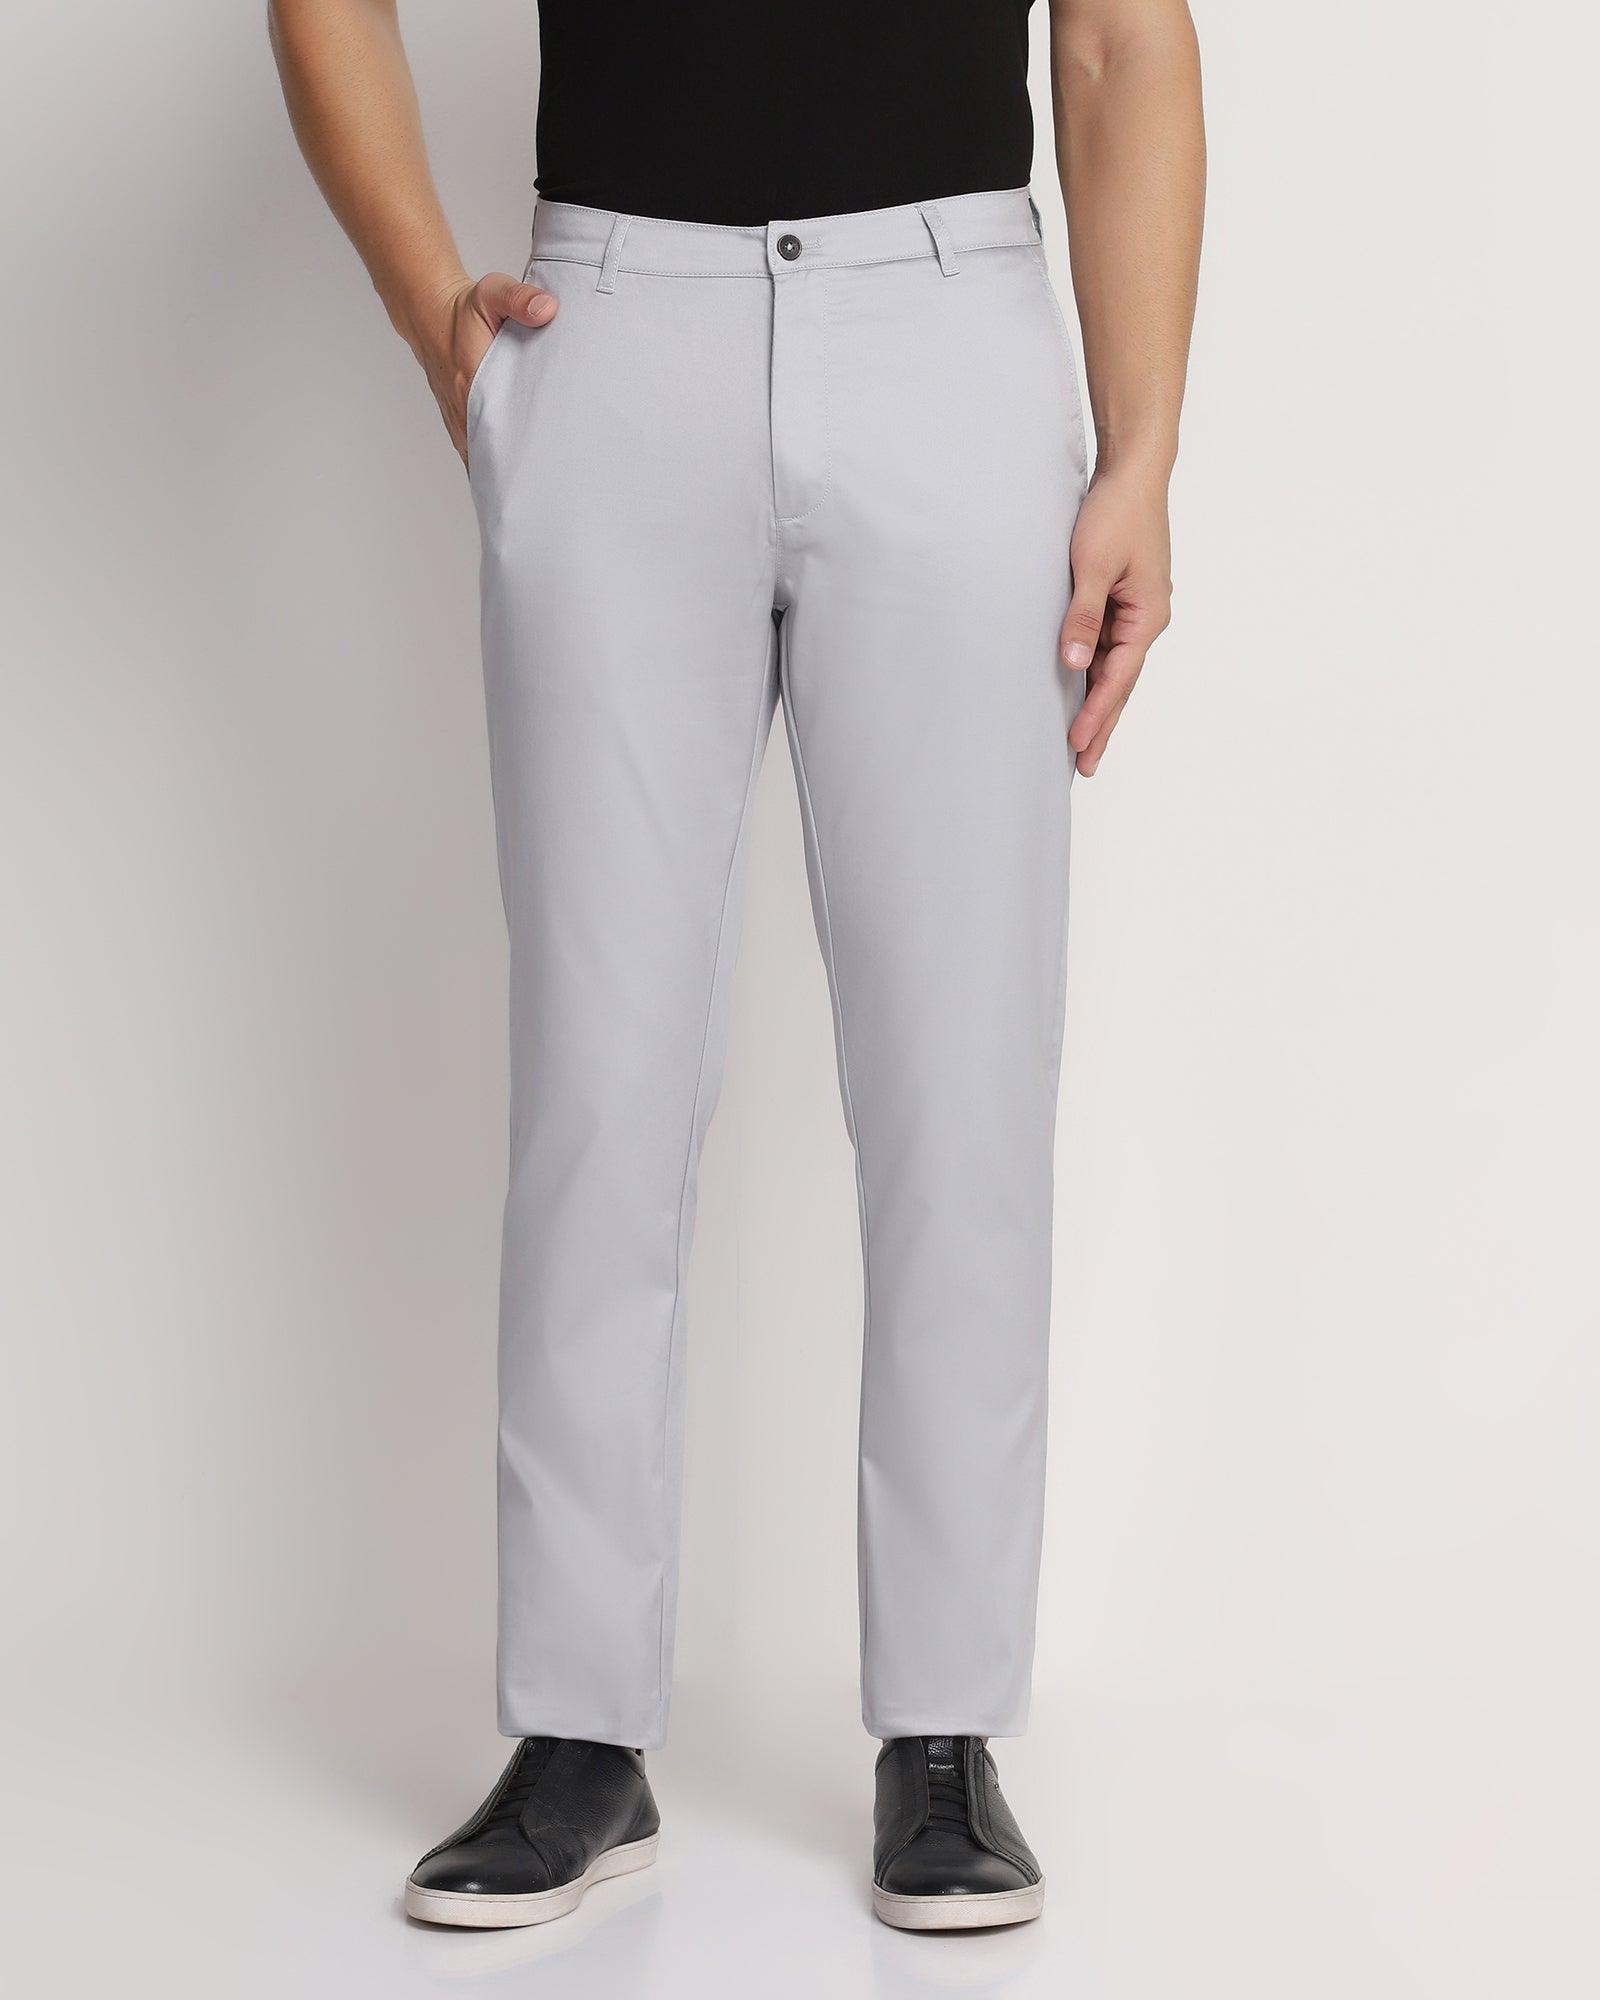 Temptech Slim Comfort Casual Grey Solid Khakis - Henry